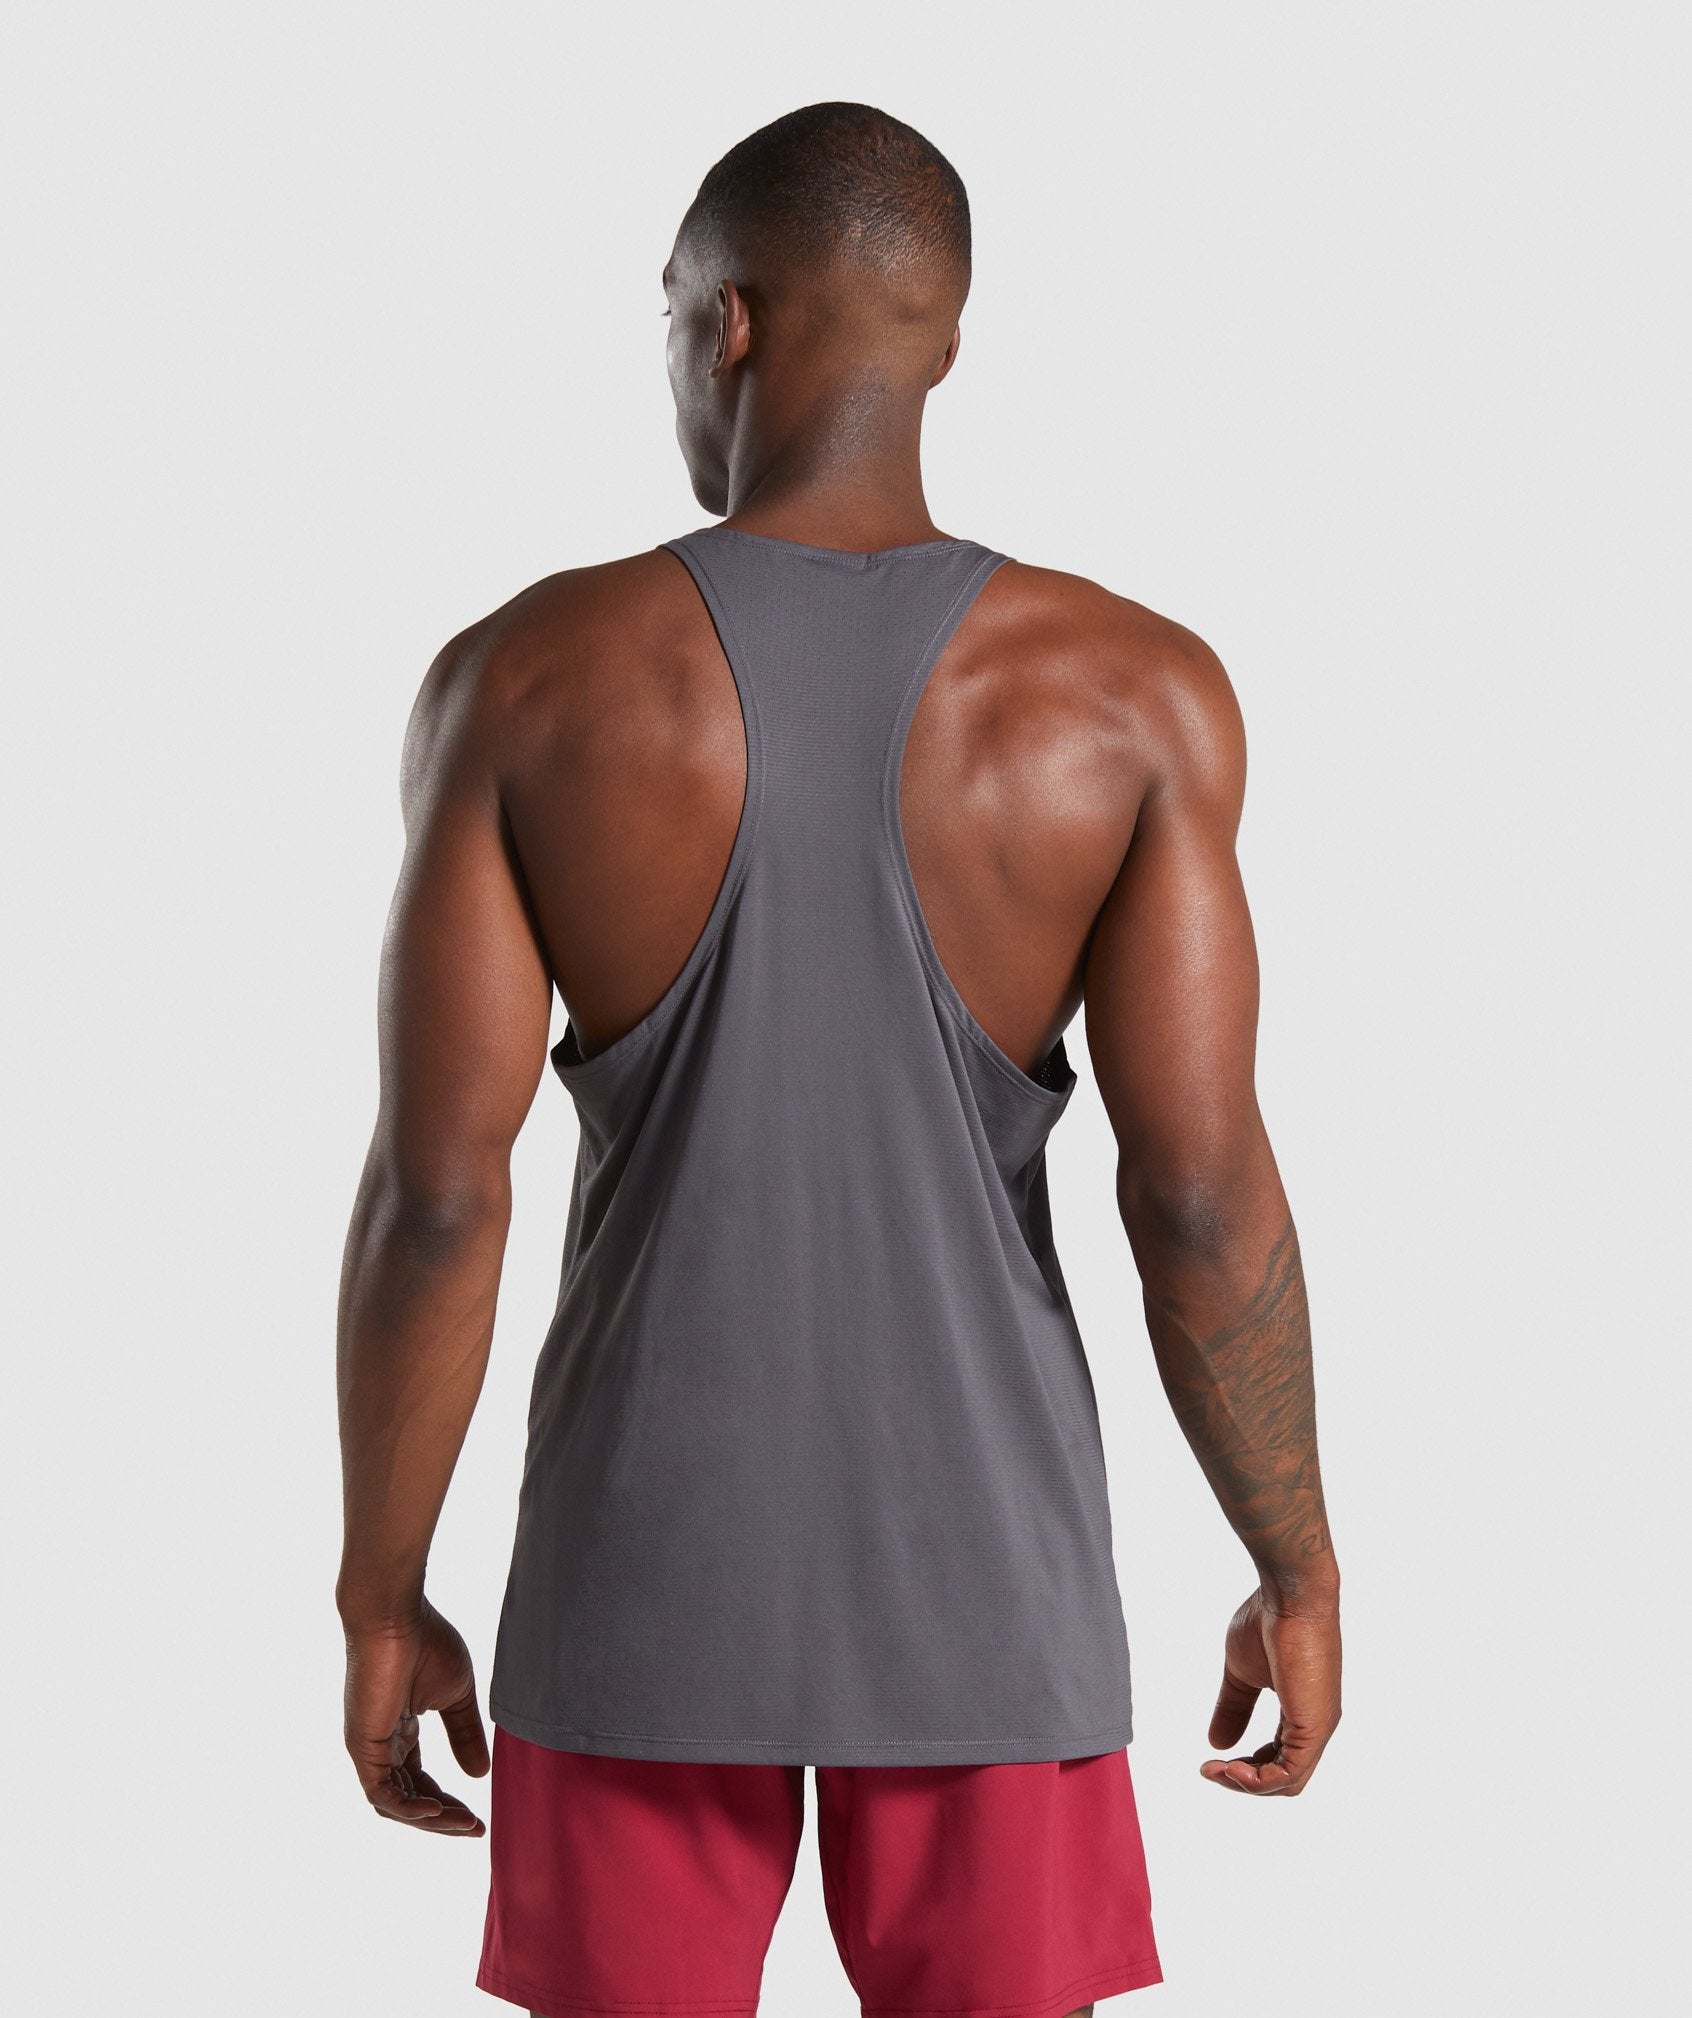 Arrival Stringer in Charcoal - view 2